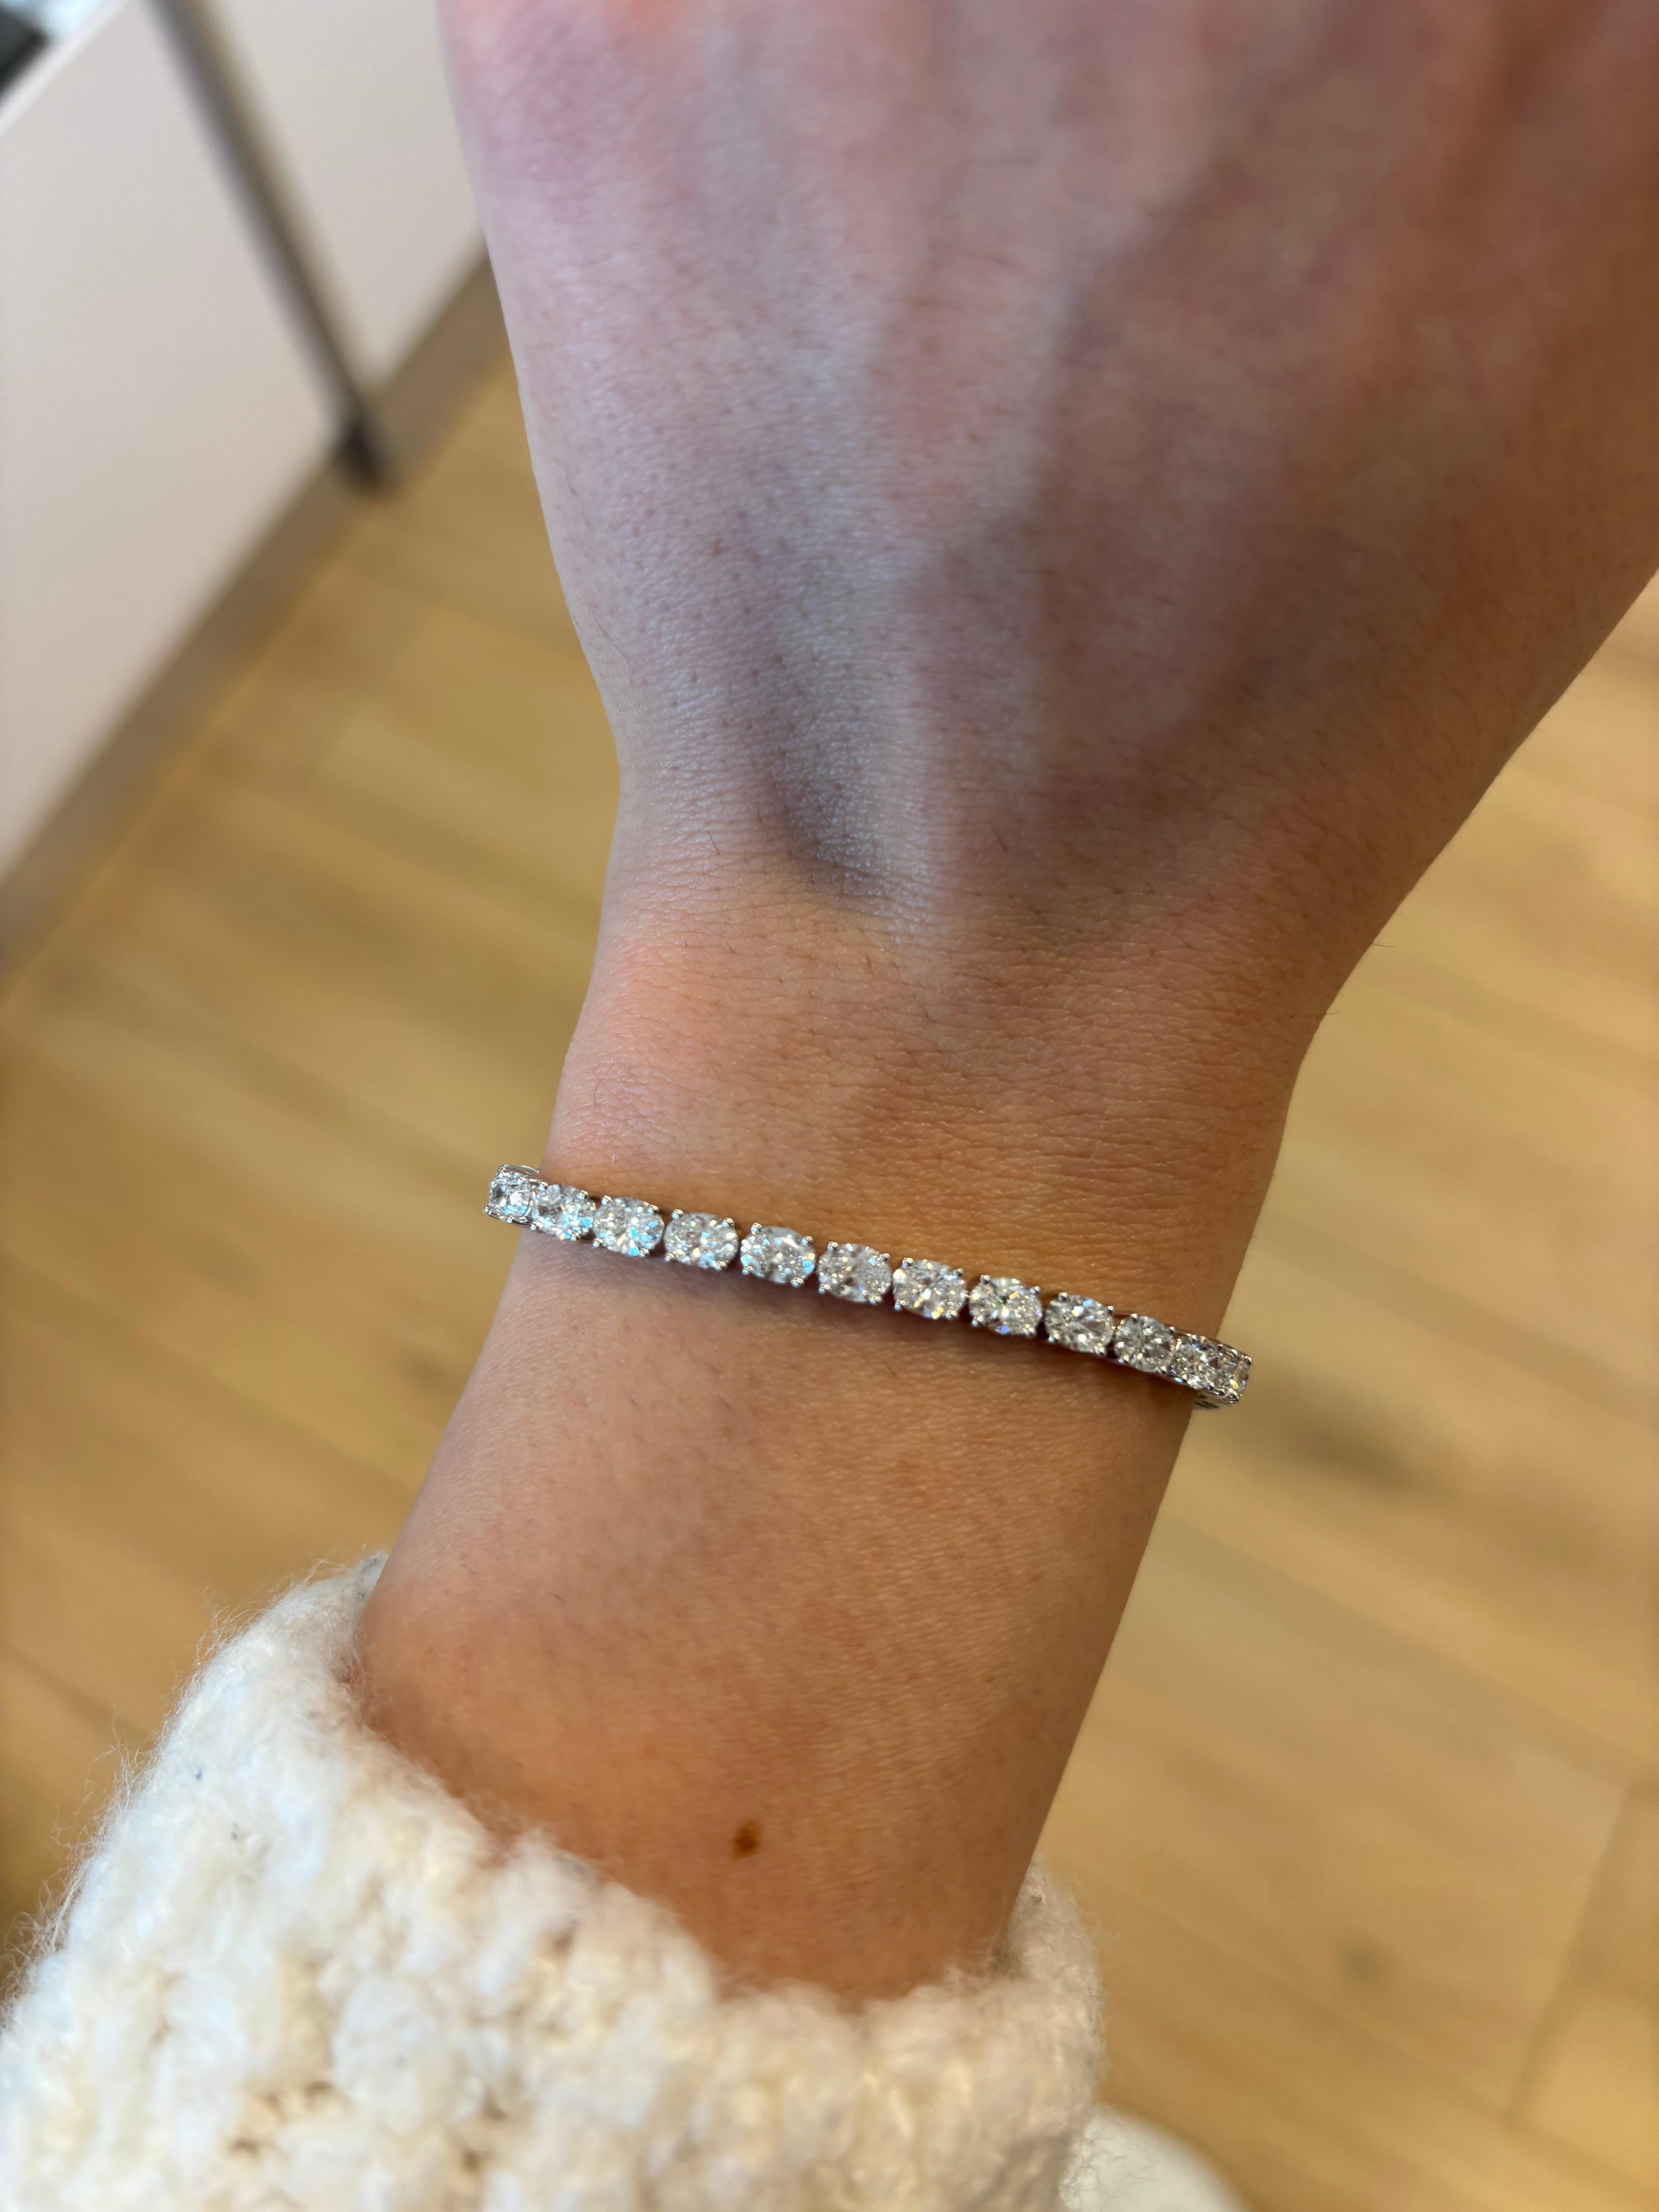 Stunning modern set east-west oval cut diamond tennis bracelet. High jewelry by Alexander Beverly Hills.
36 oval cut diamonds, 8.49 carats. Approximately F/G color and VS clarity. 18-karat white gold, 9.67 grams, 6.75 inches.
Accommodated with an up